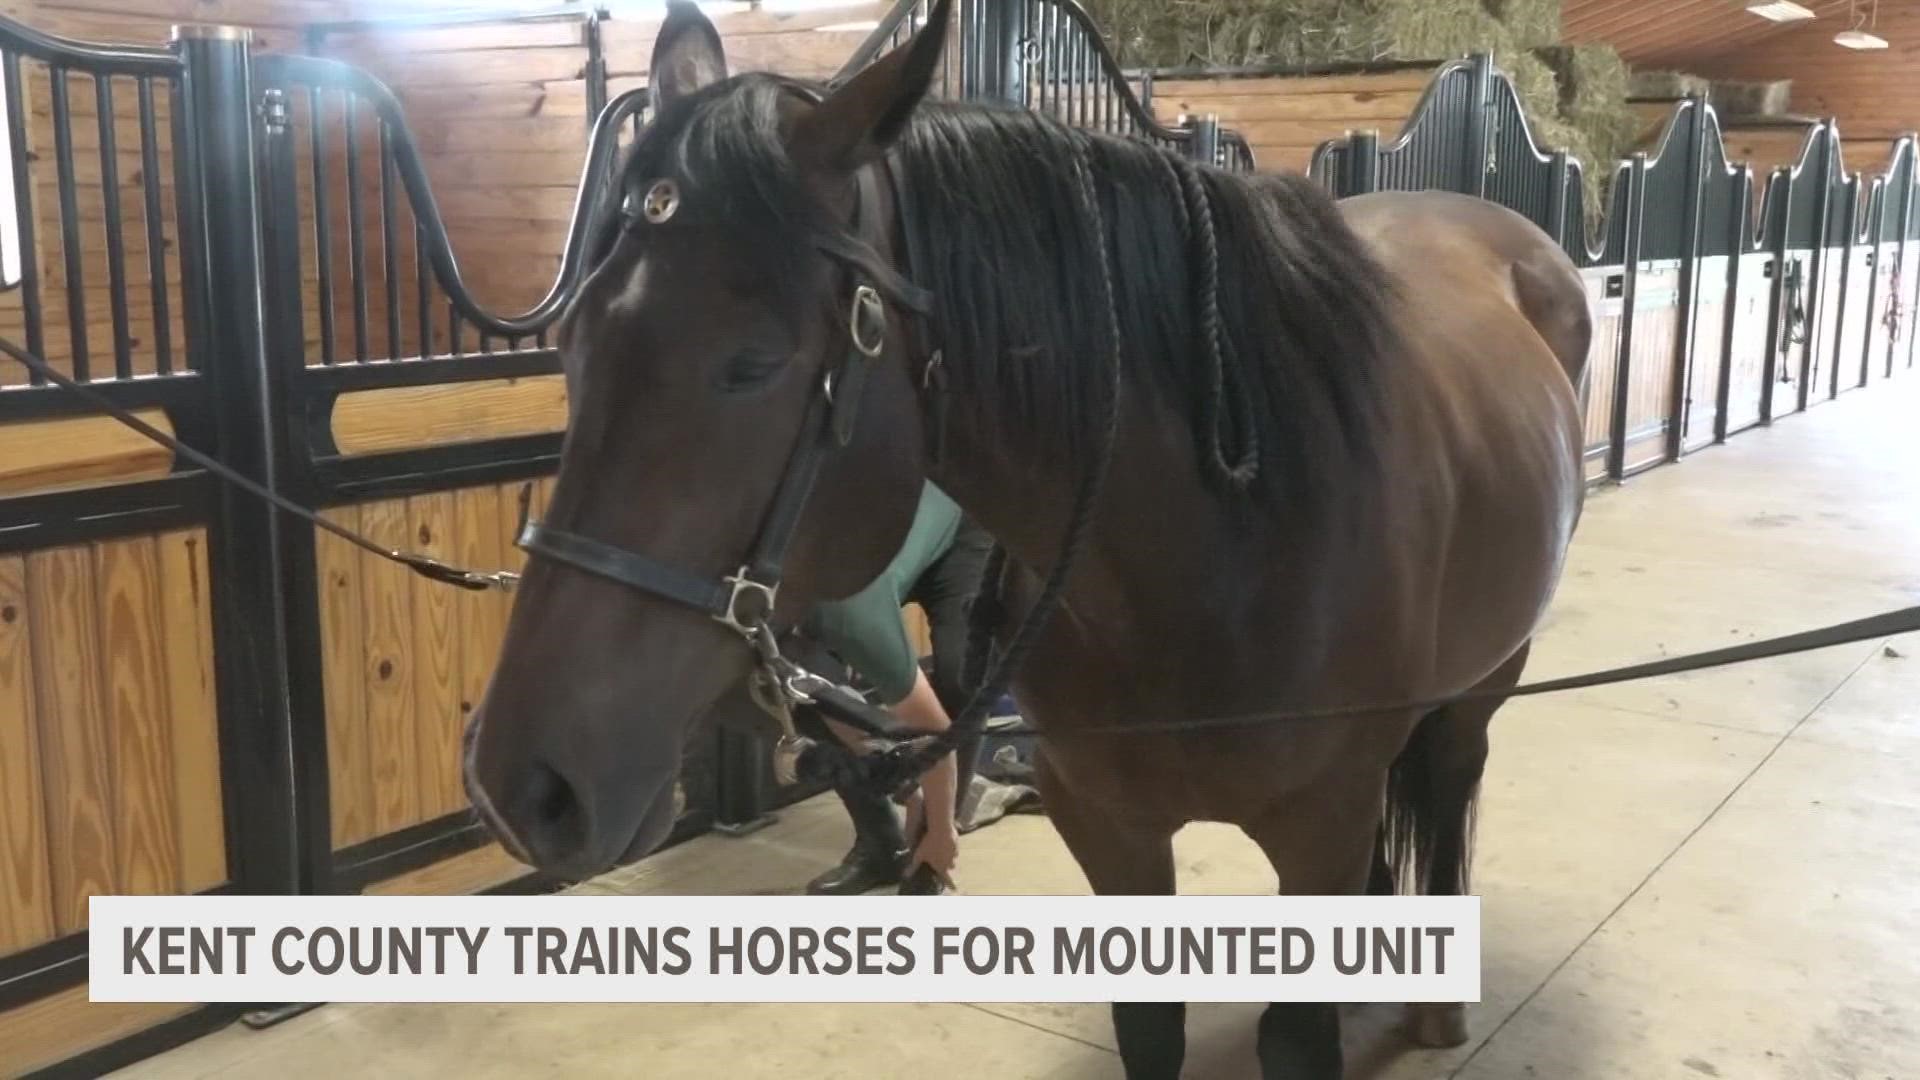 The horses need to be acclimatized to different scenarios a deputy may need them for, and many of those can't be recreated at the training facility.